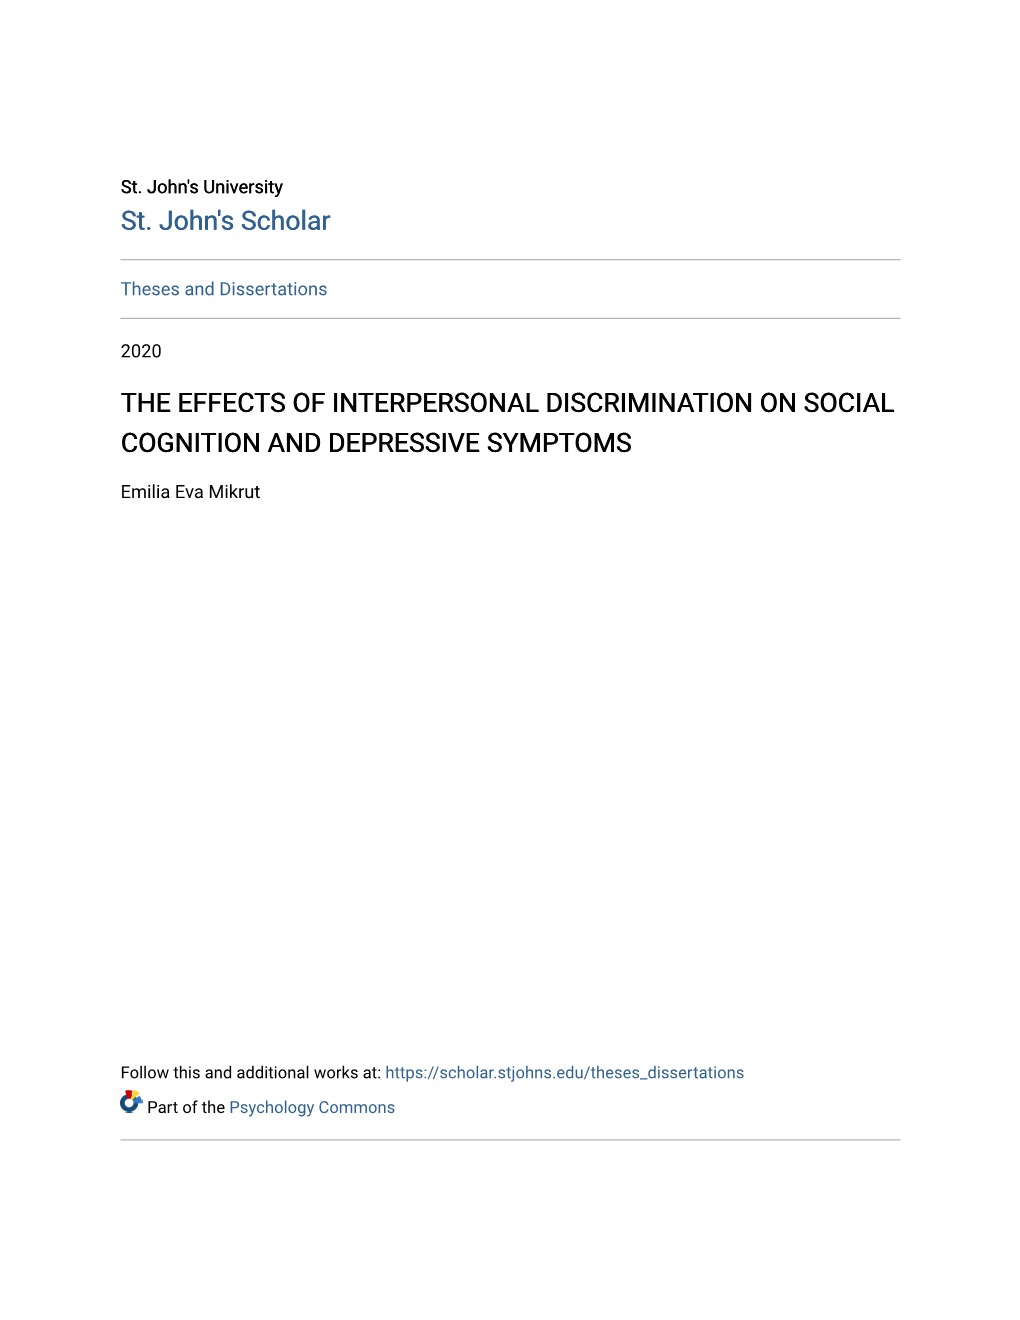 The Effects of Interpersonal Discrimination on Social Cognition and Depressive Symptoms